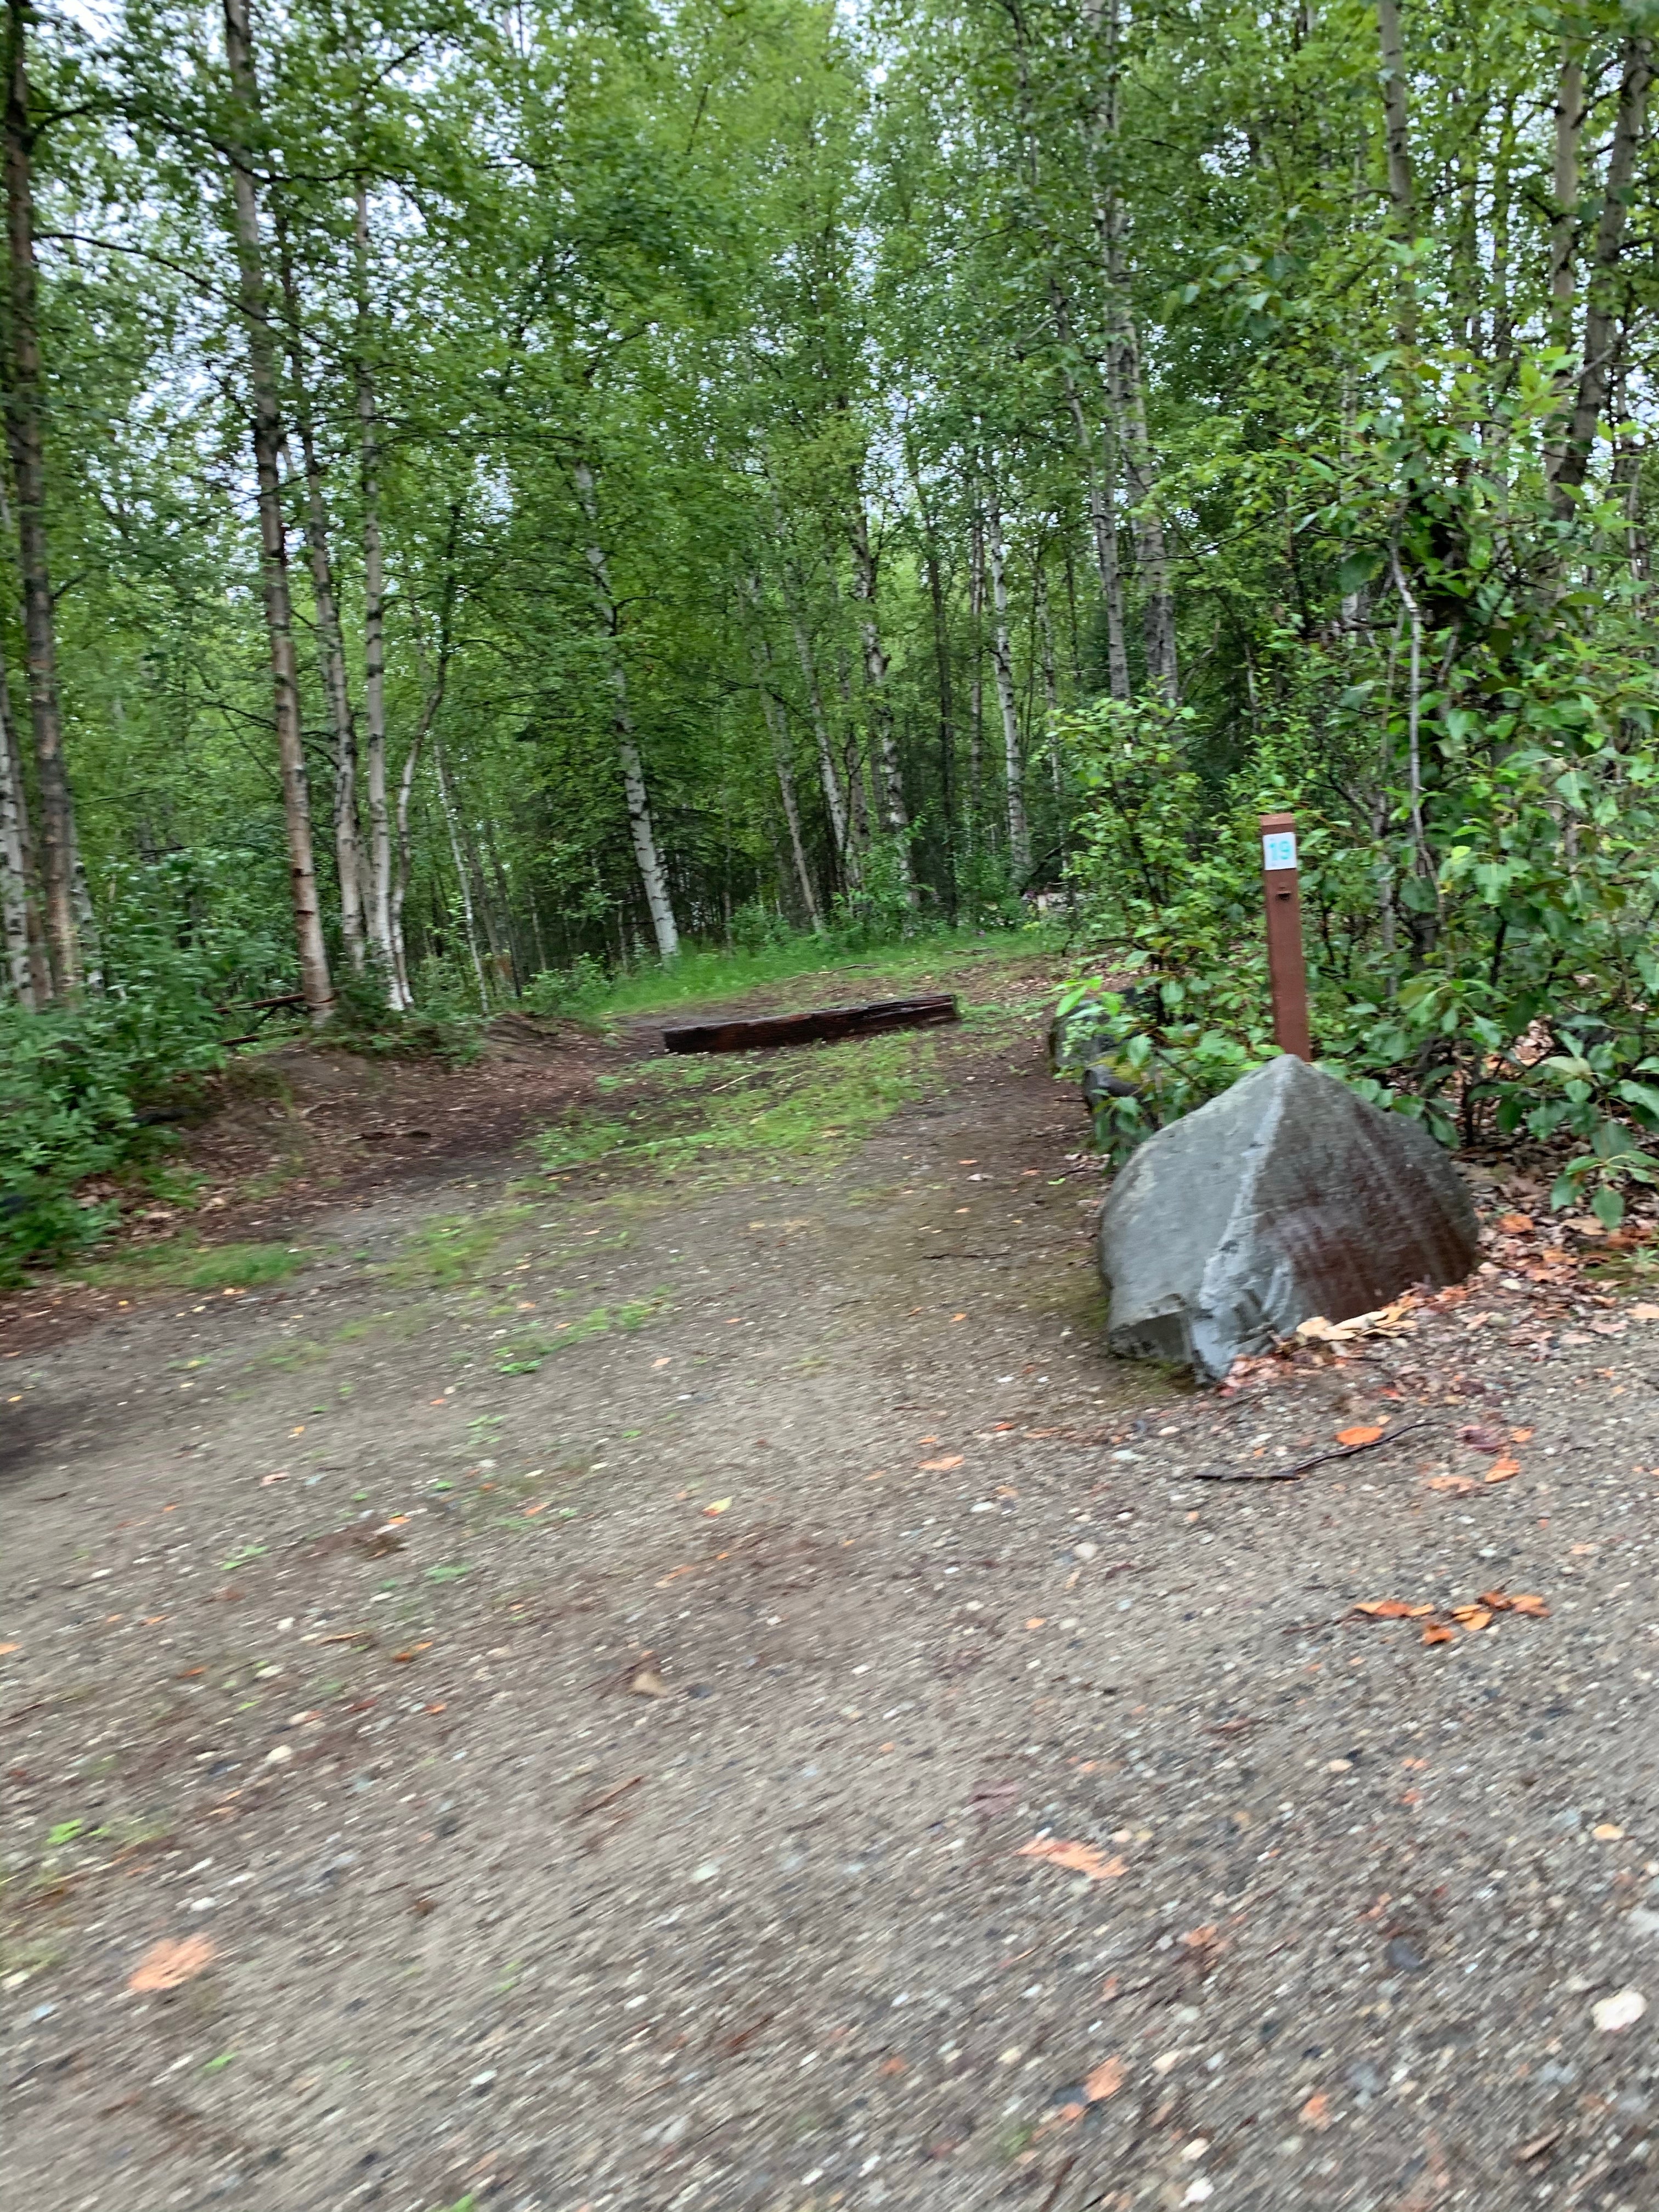 Camper submitted image from Nancy Lake State Recreation Site - 5